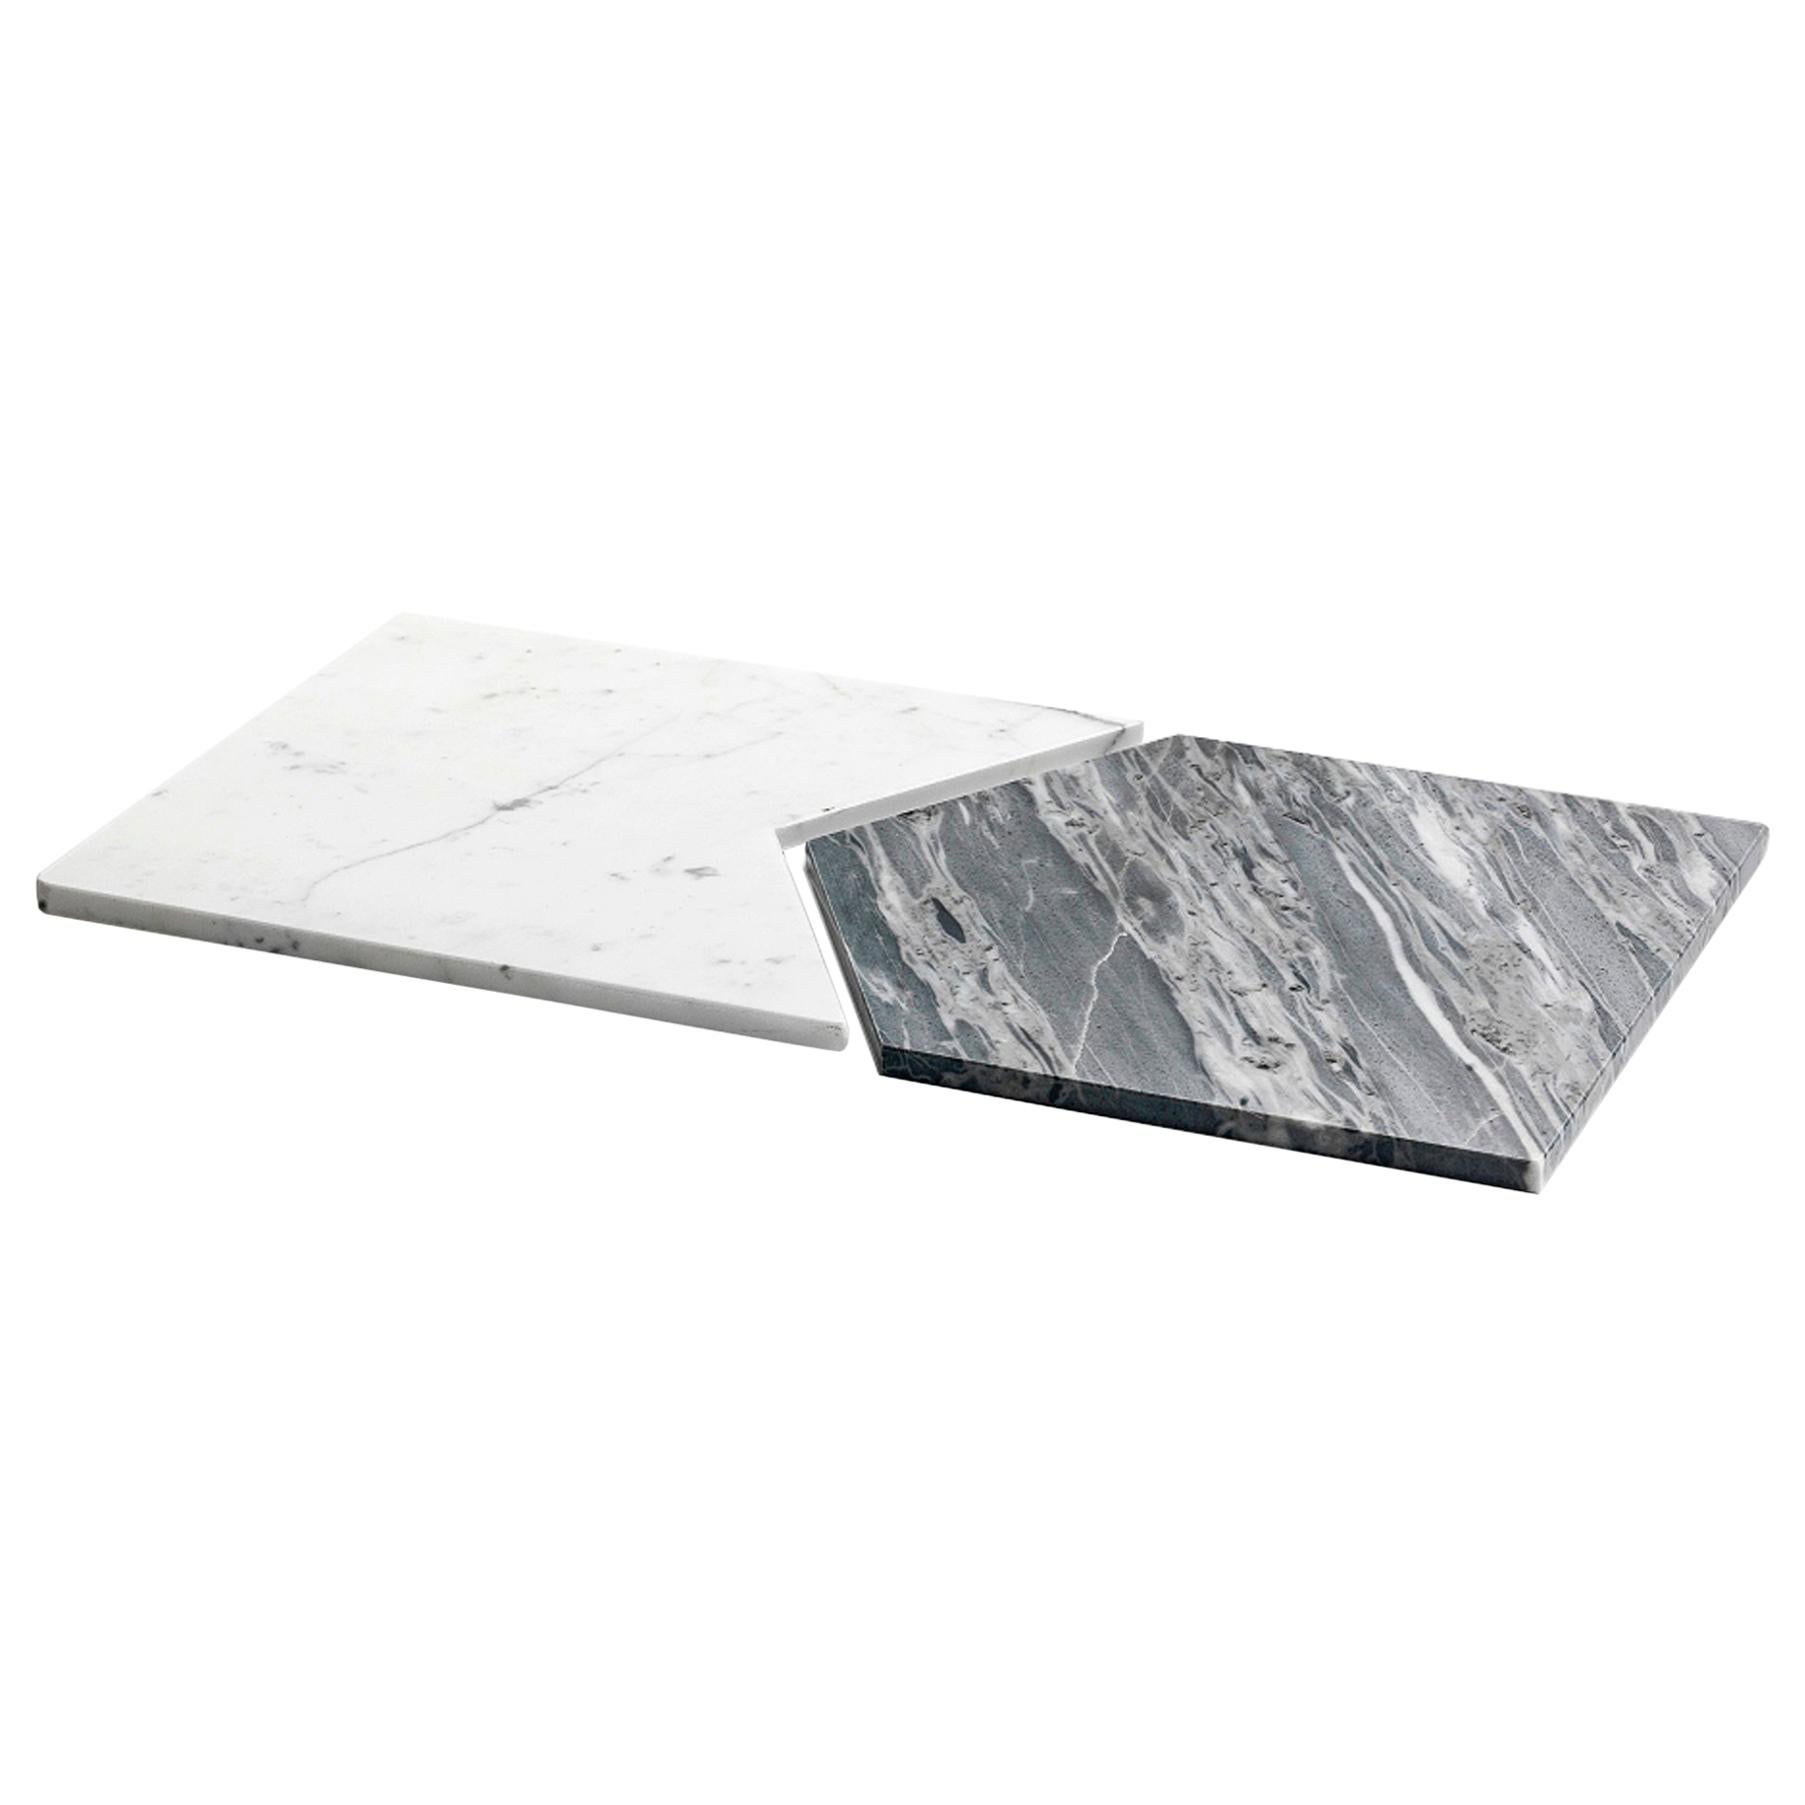 Handmade Set of 2 Snap-Fit Platters in White Carrara and Grey Bardiglio Marble For Sale